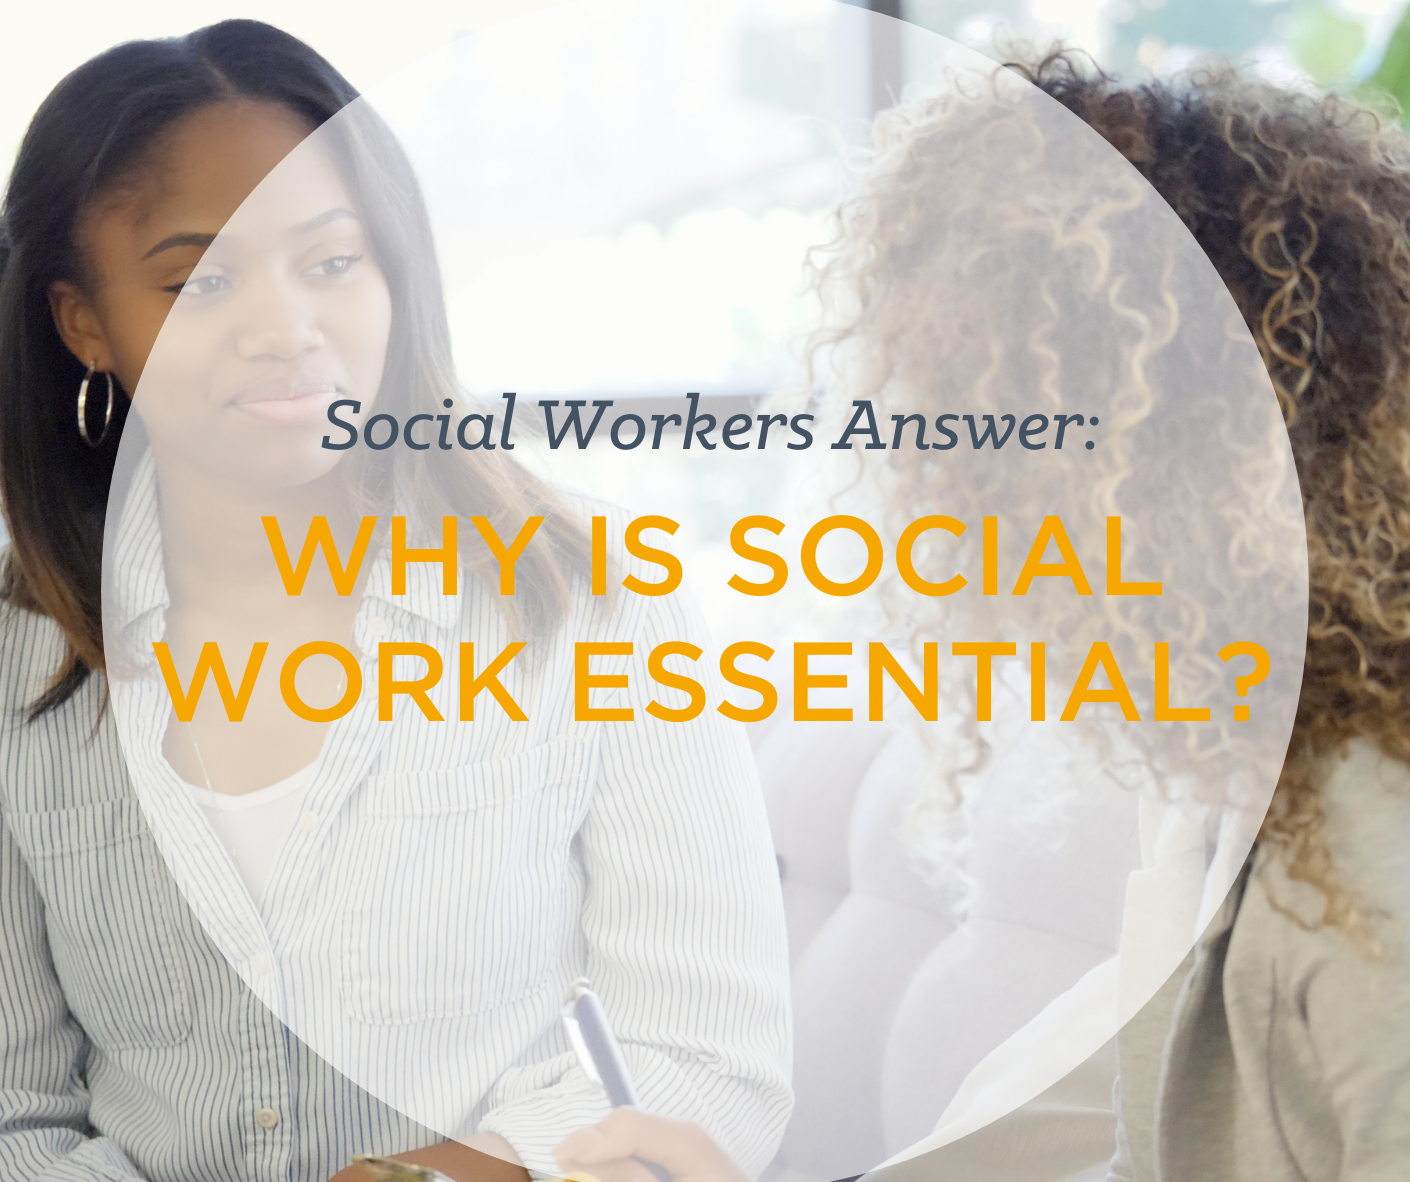 Social Workers Answer: Why is Social Work Essential?